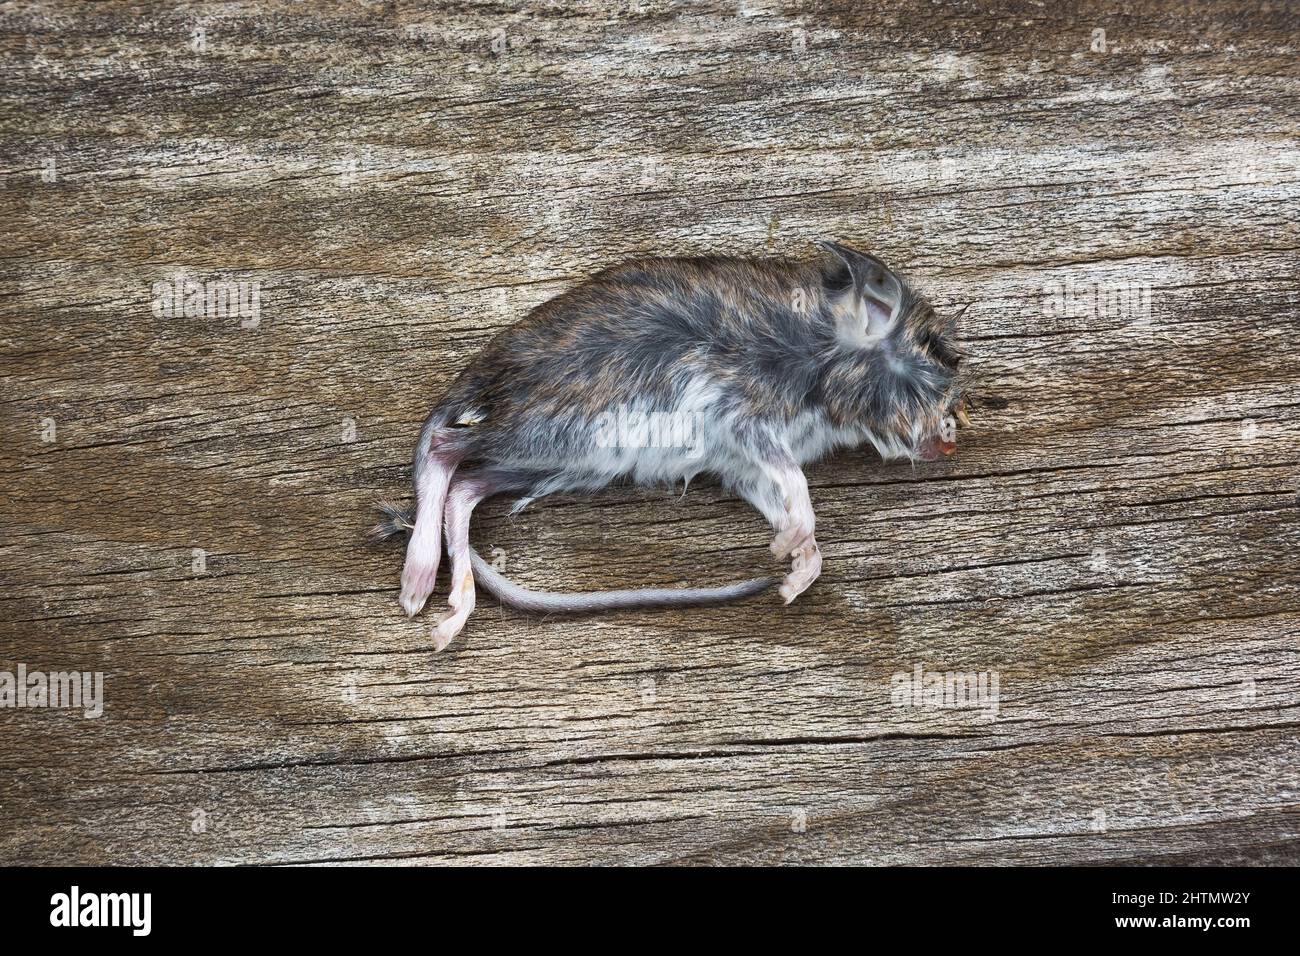 Dead Apodemus - Field mouse on top of grey weathered wooden surface. Stock Photo